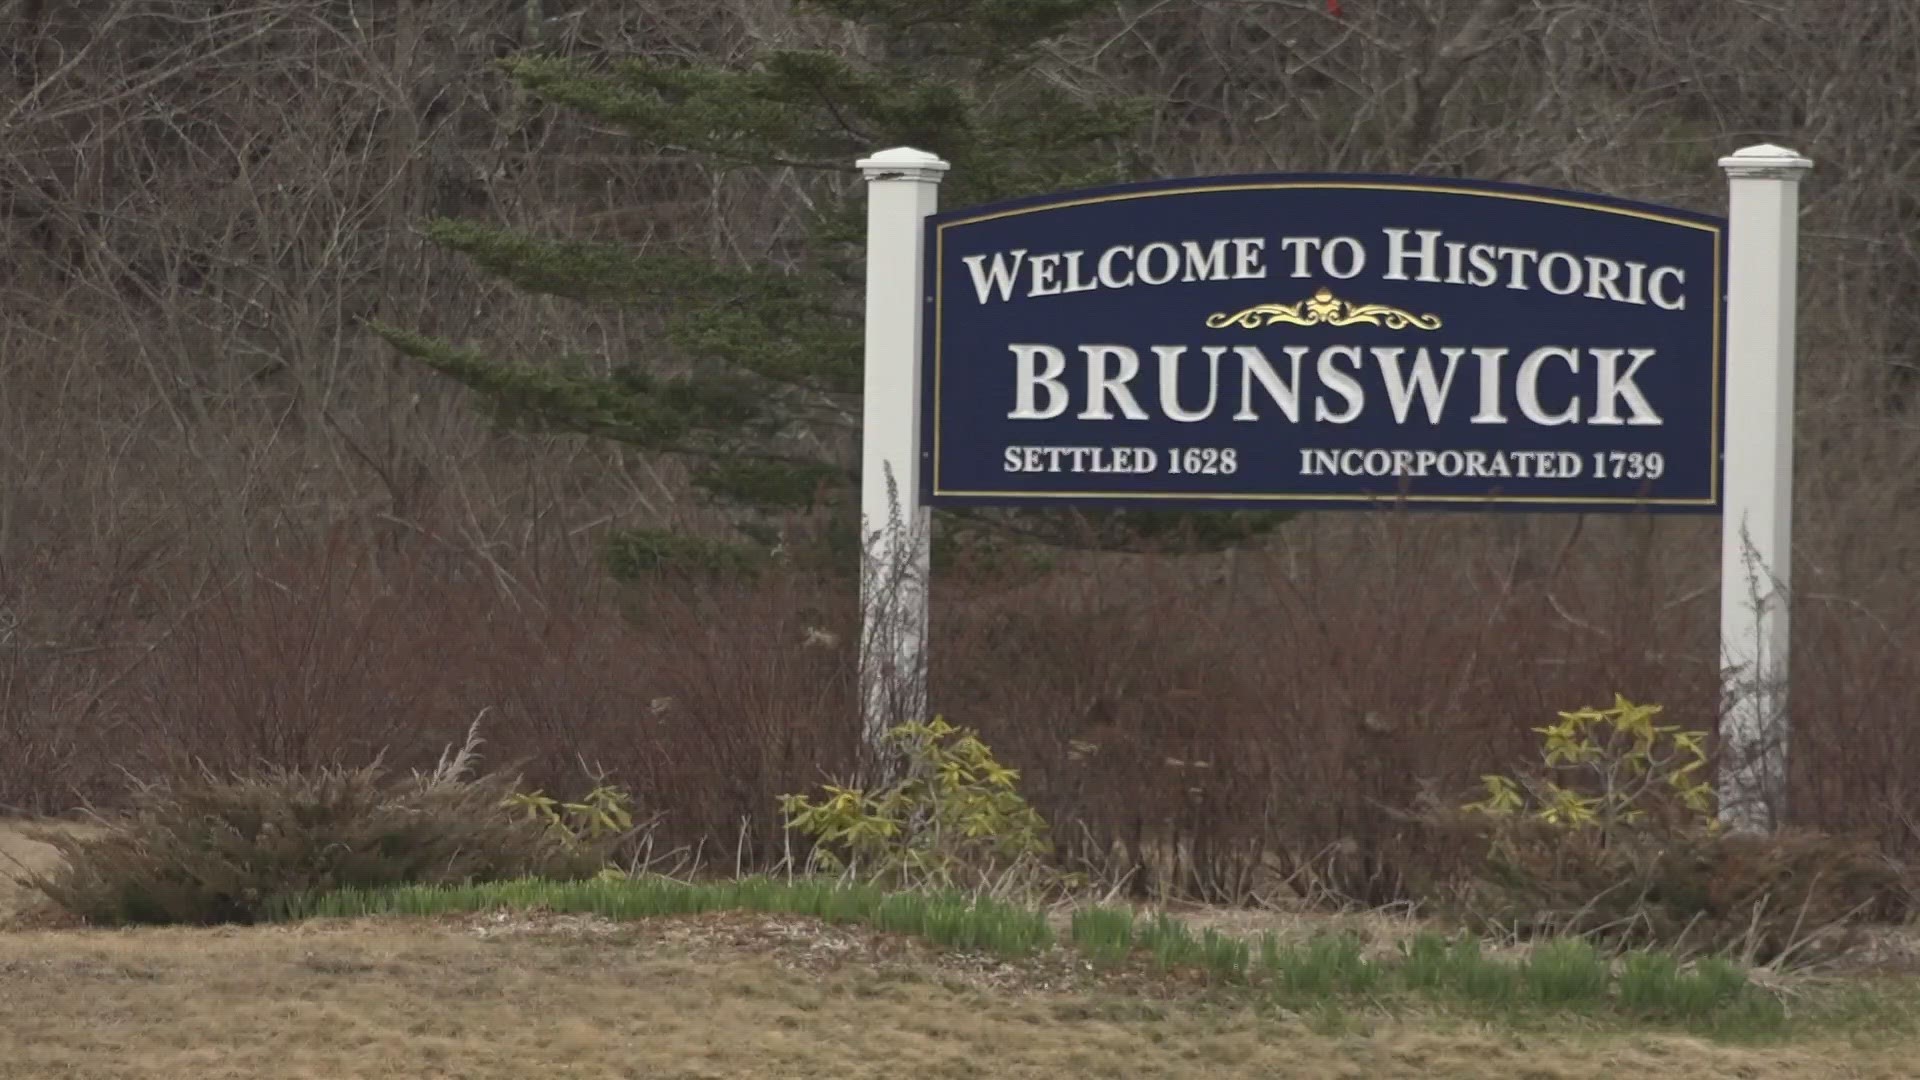 New housing at Brunswick Landing will go to 60 asylum-seeking families for two years starting in June. After that, half of the units will go to market rate.